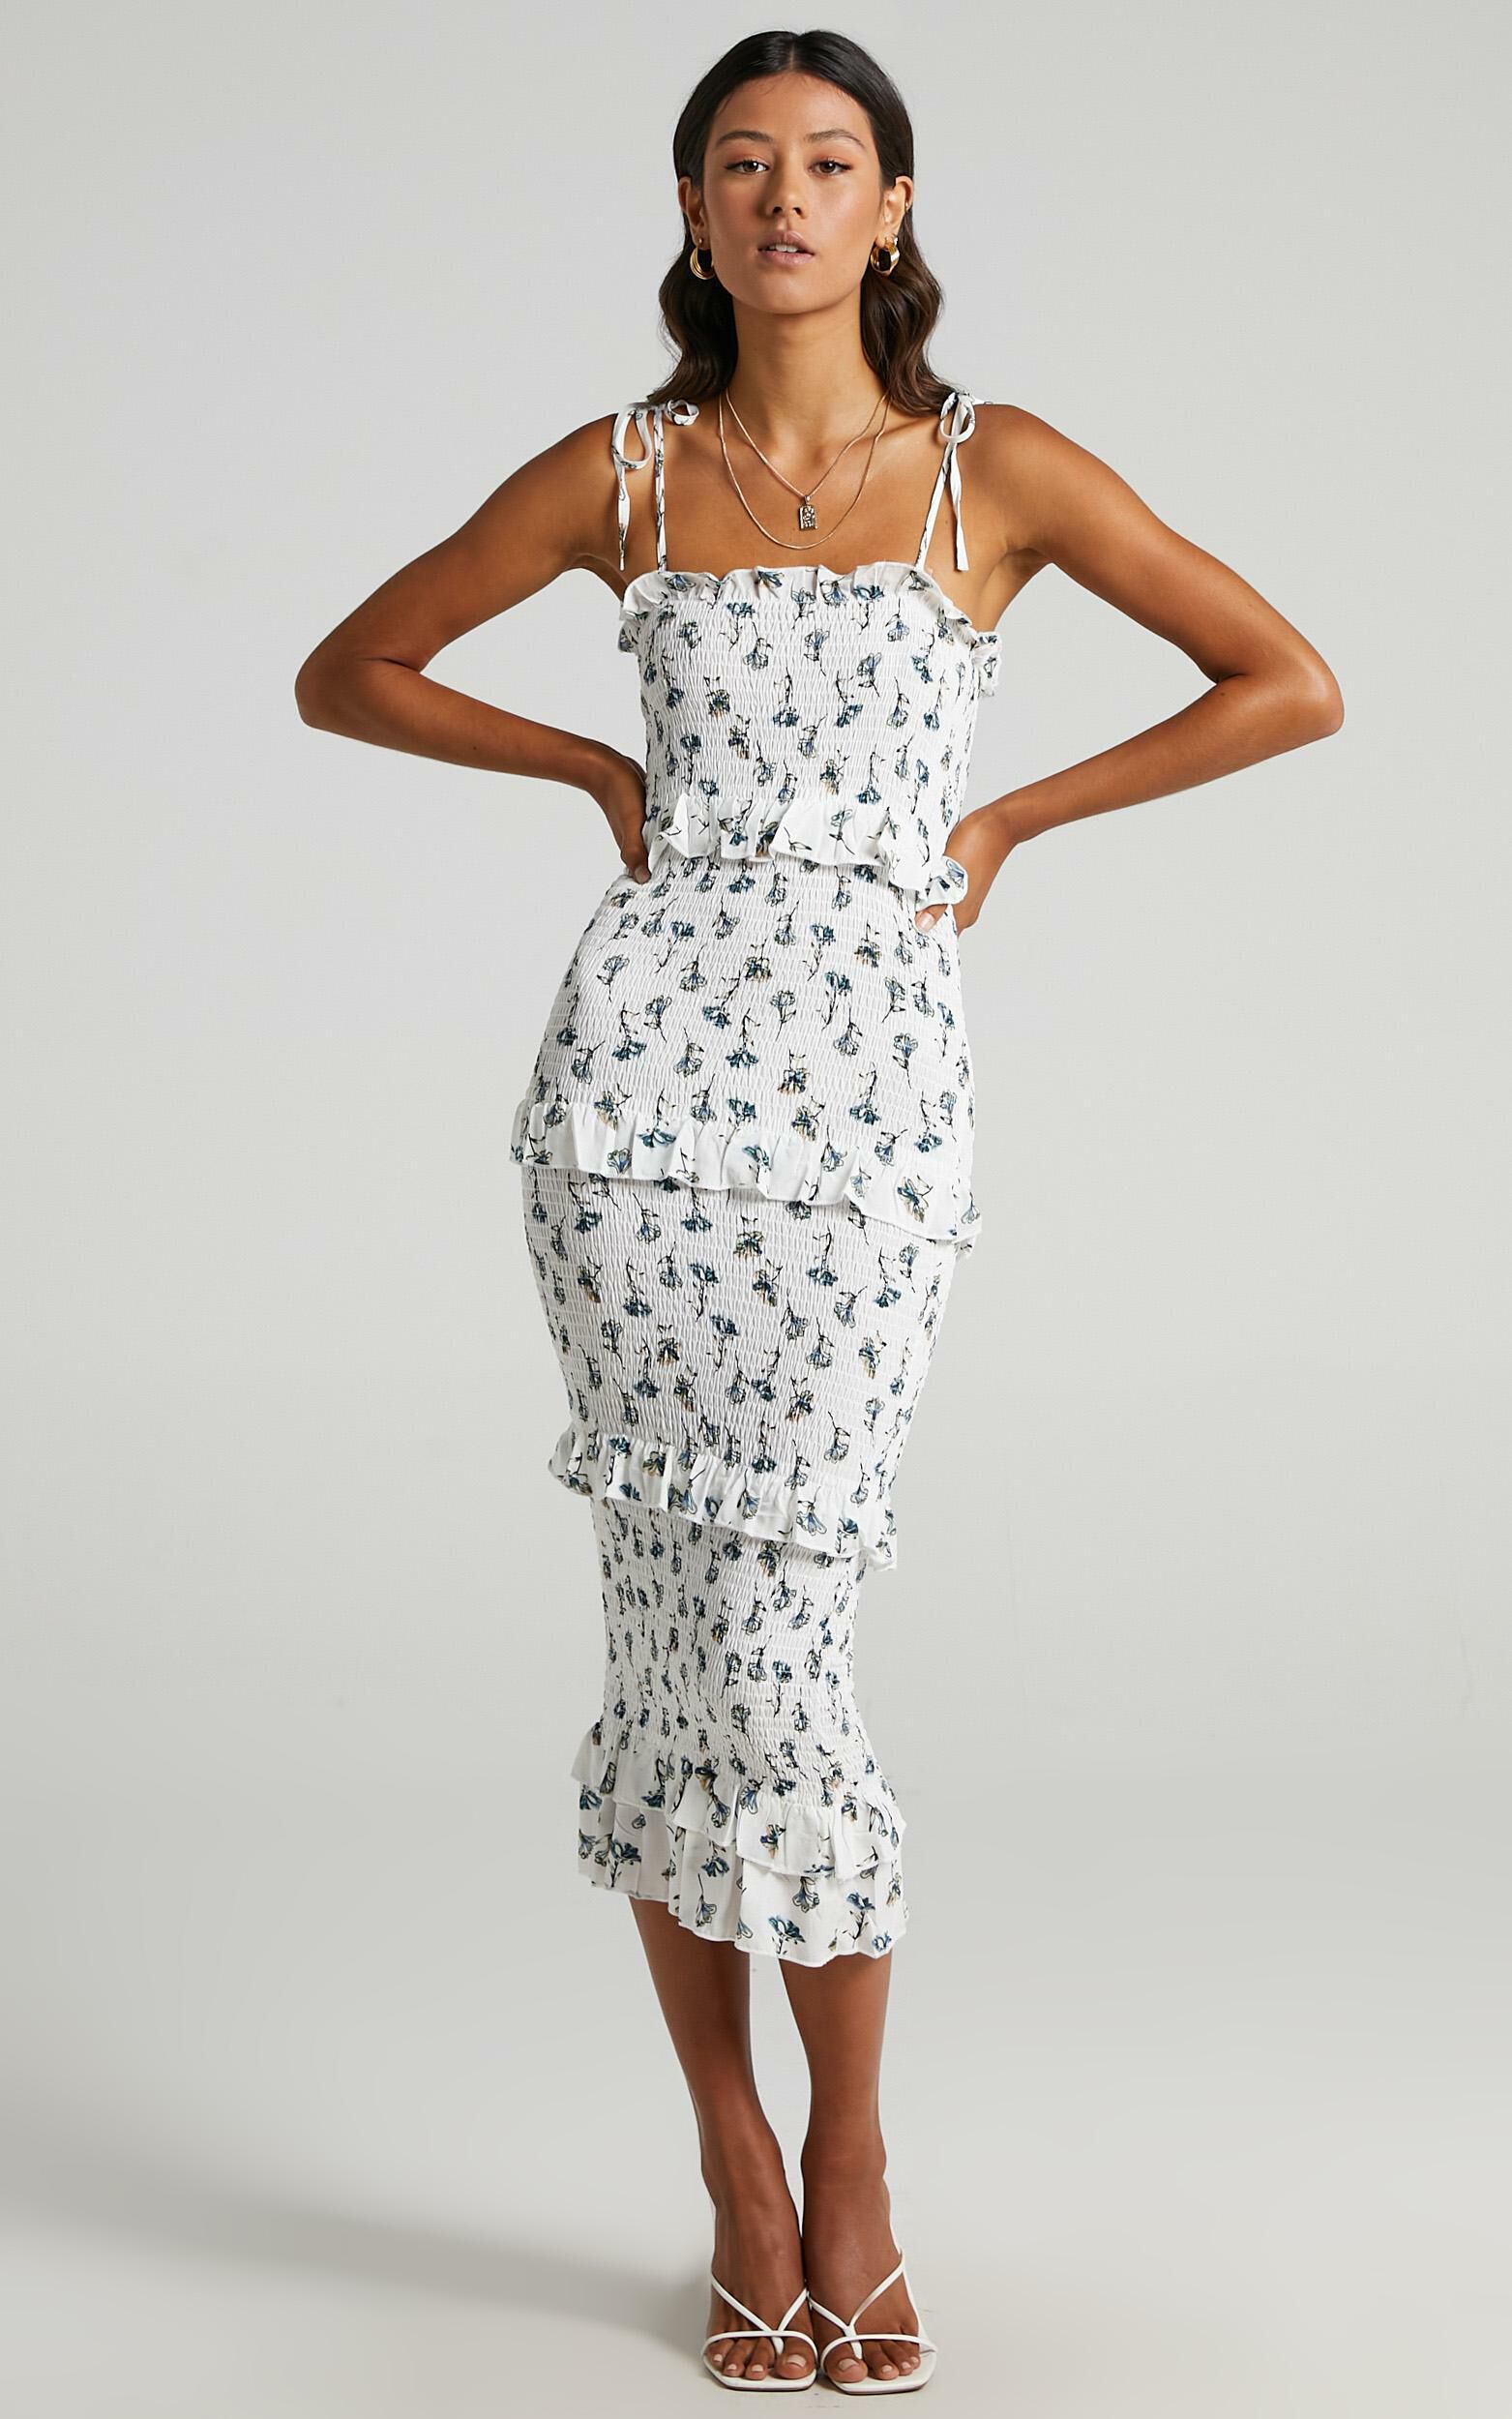 My Favourite Thing Shirred Midi Dress in White Floral | Showpo USA